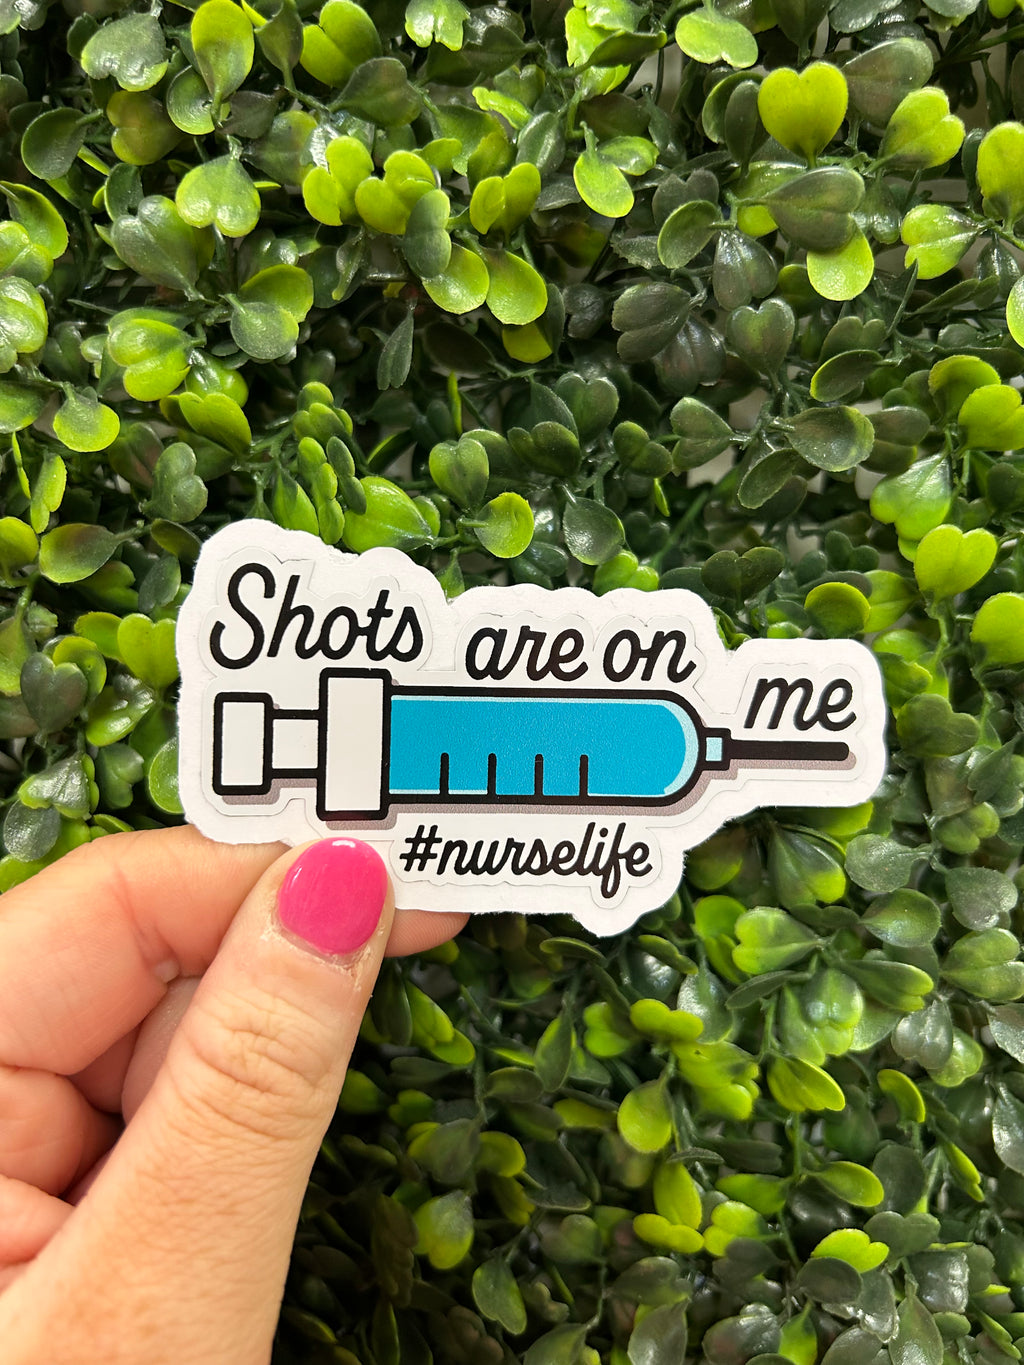 Show off your #nurselife pride with the Shots Are On Me Sticker! This funny sticker will make your friends and co-workers laugh and remind them that you're the one in charge of shots when you're around.  - shots are definitely on YOU!